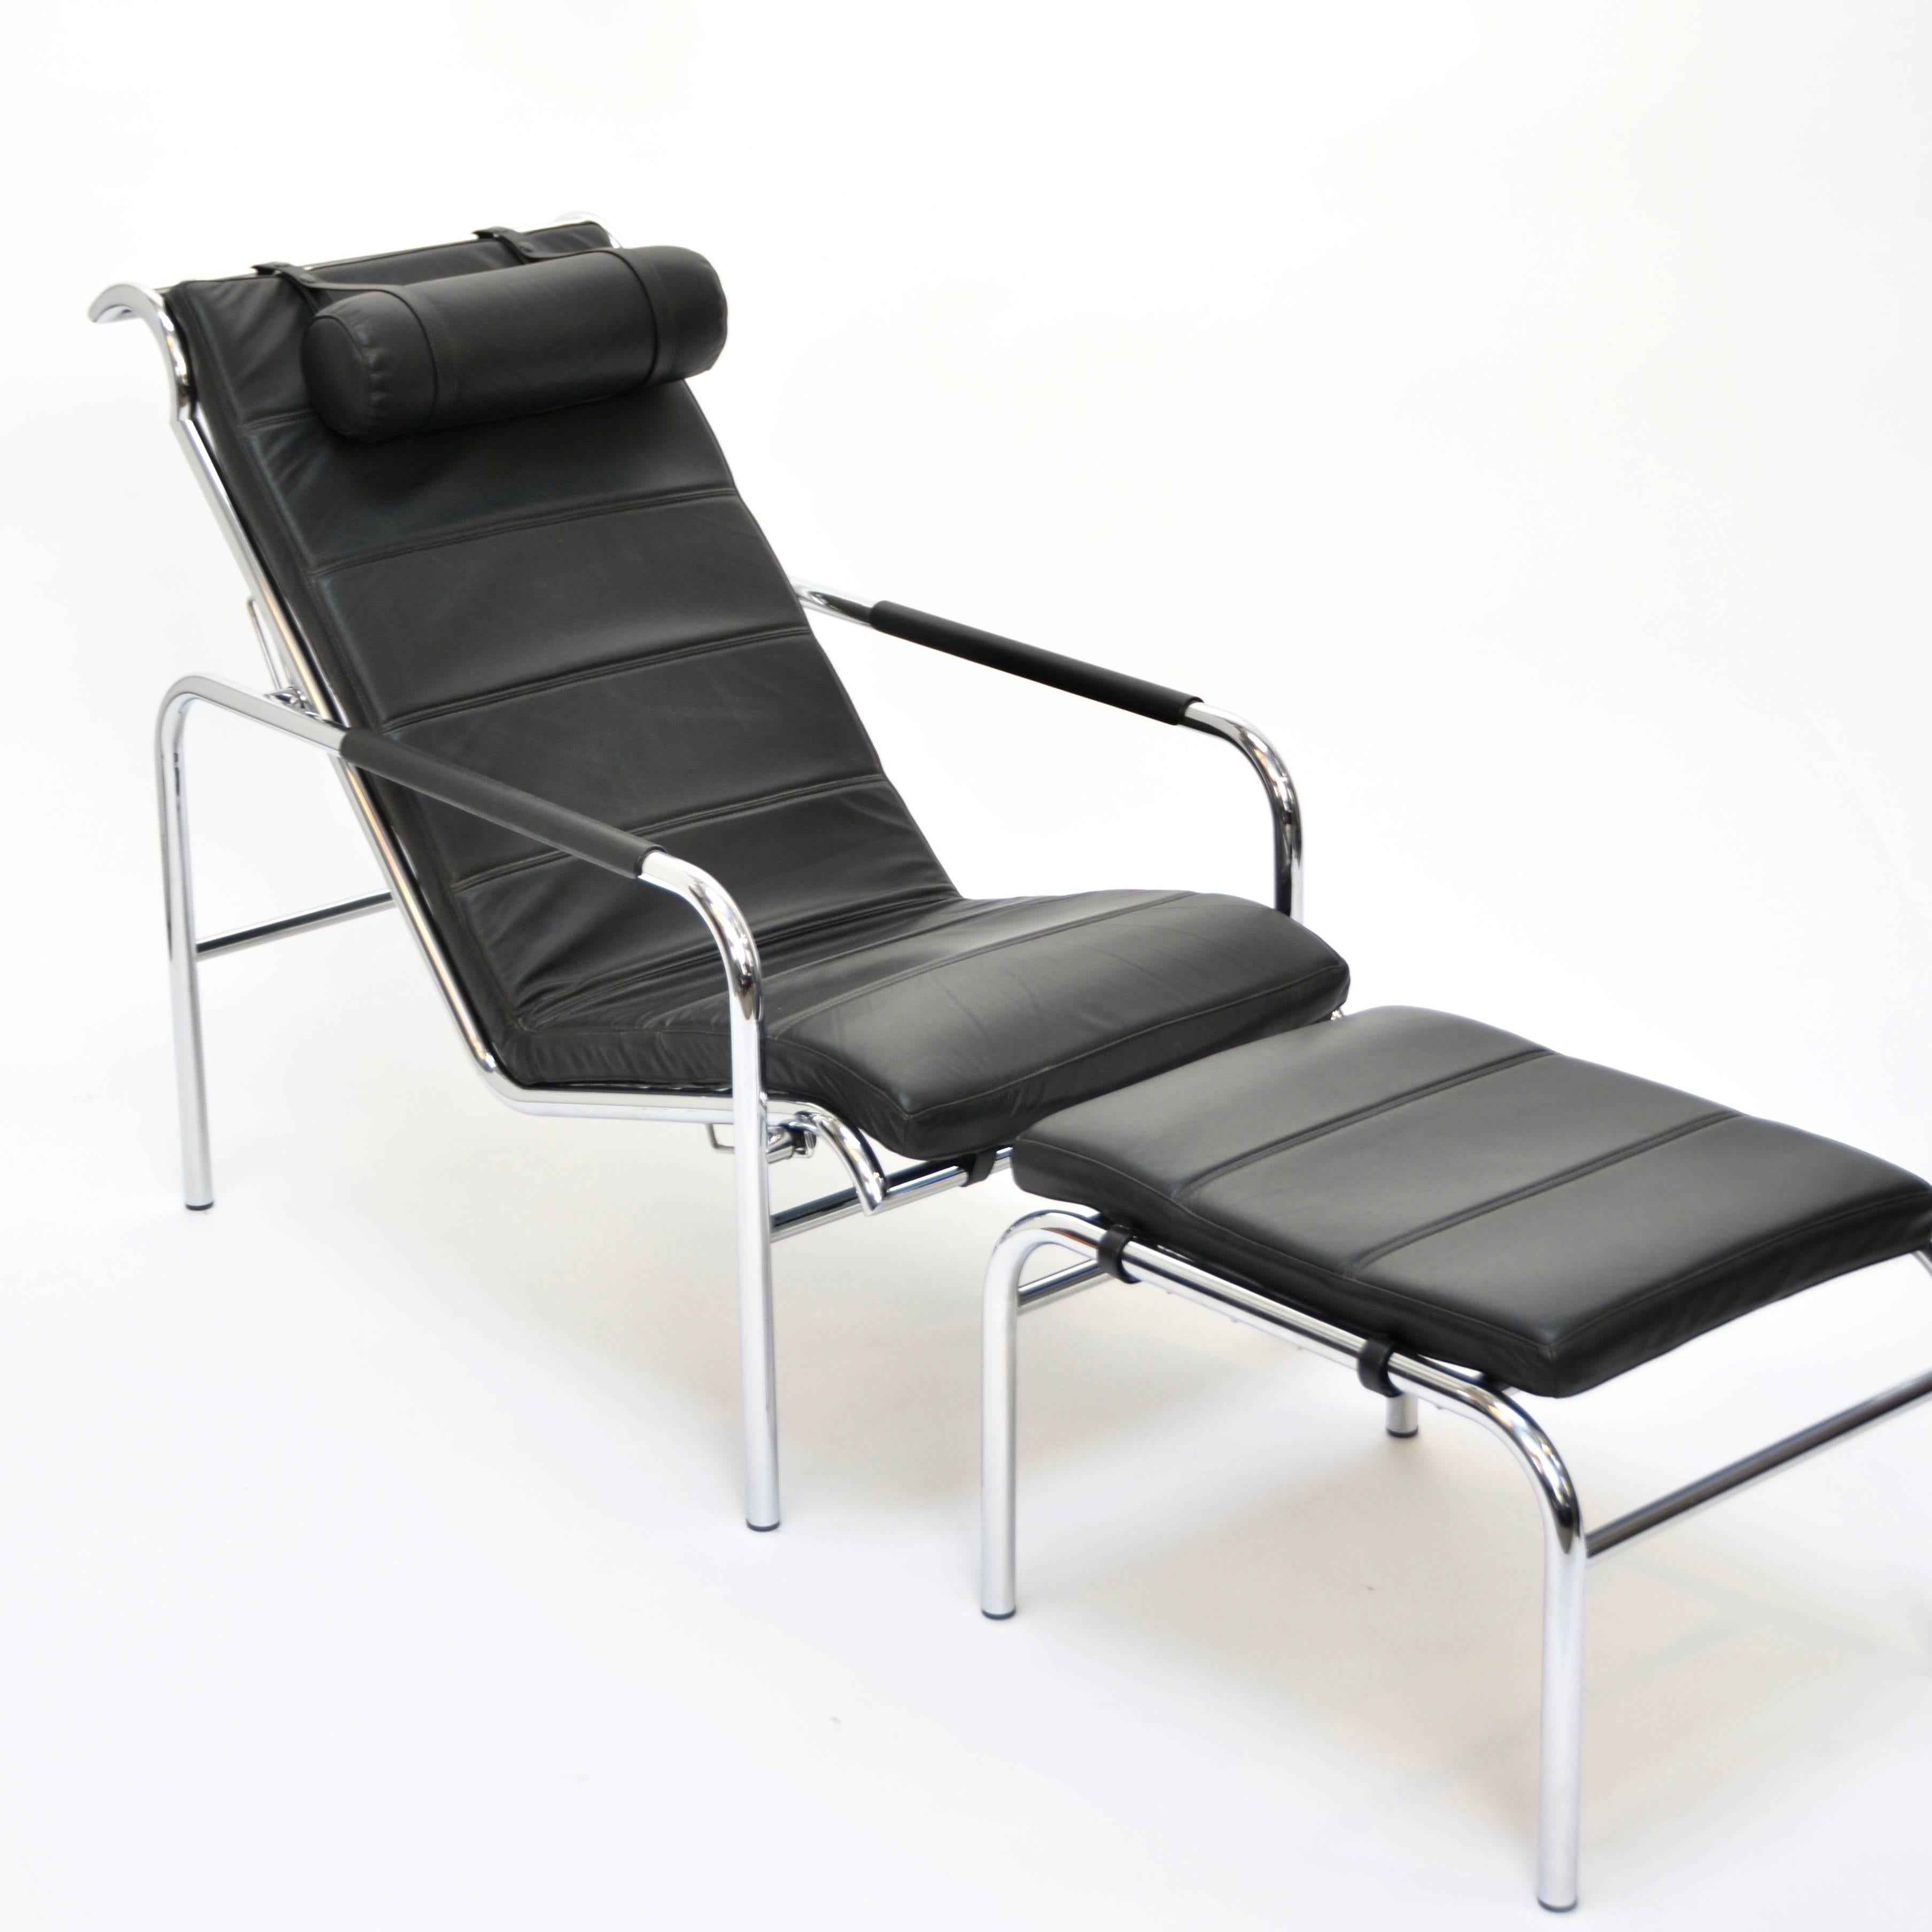 This is a showroom condition Genni lounge chair and ottoman designed by Gabriele Mucci in 1935. It is constructed using a chromium-plated steel tube frame. The cushion, armrest covers and headrest are polyurethane upholstered in your black leather.